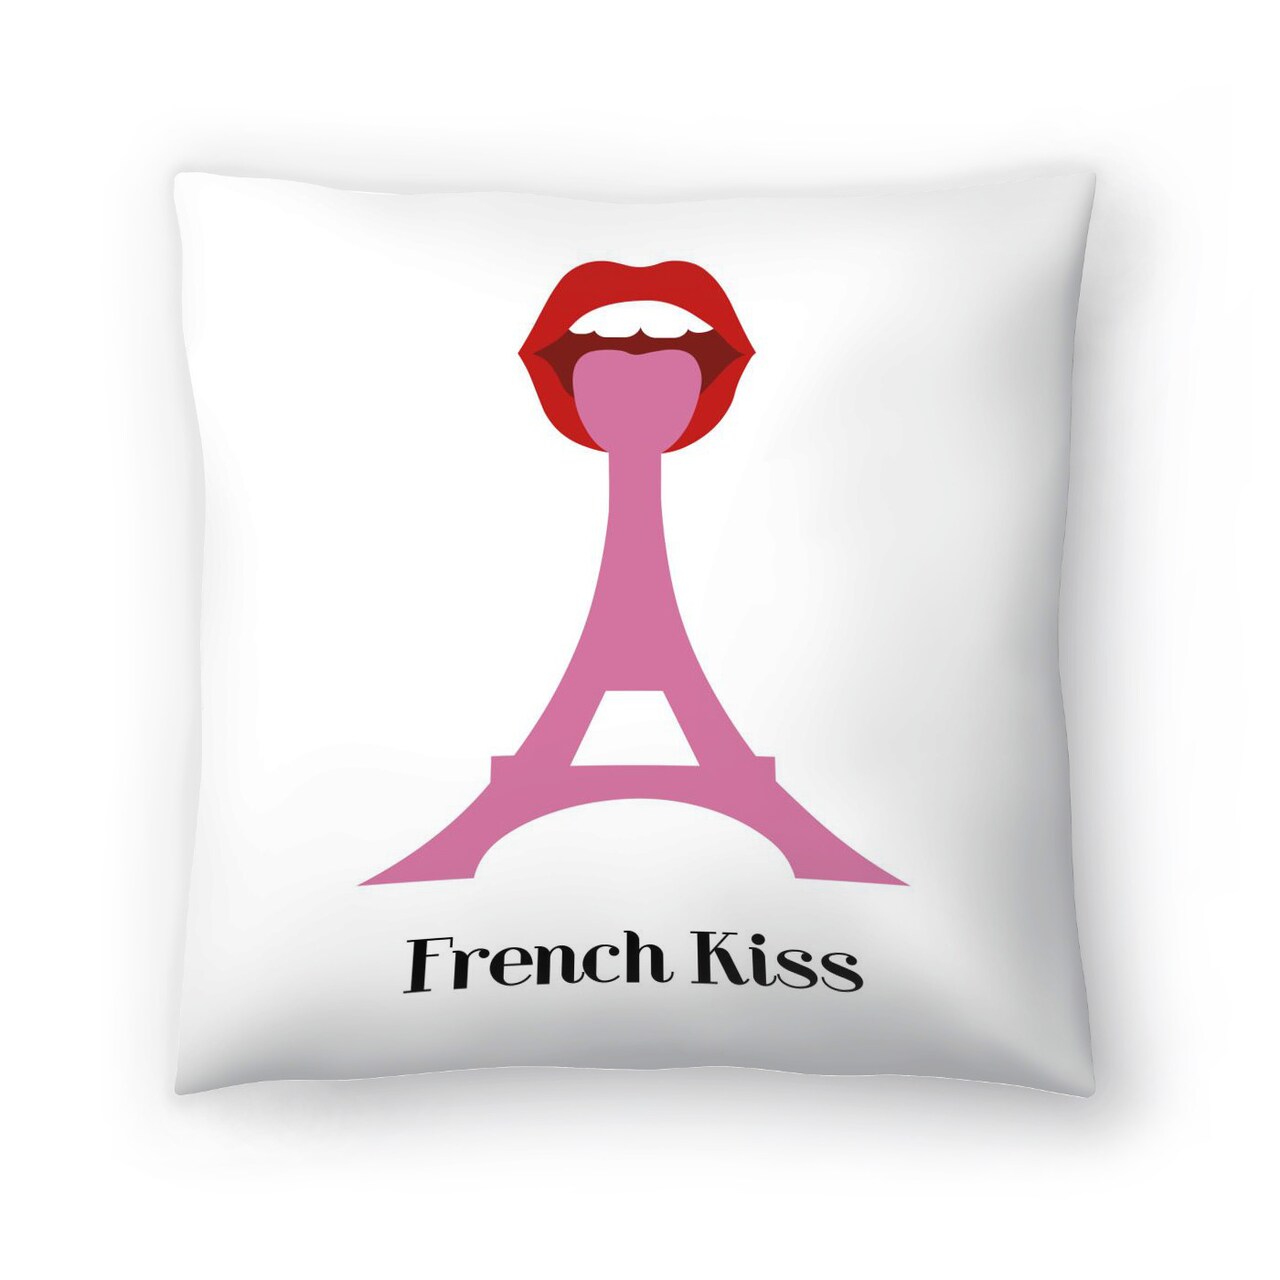 French Kiss by Atelier Posters Throw Pillow Americanflat Decorative Pillow